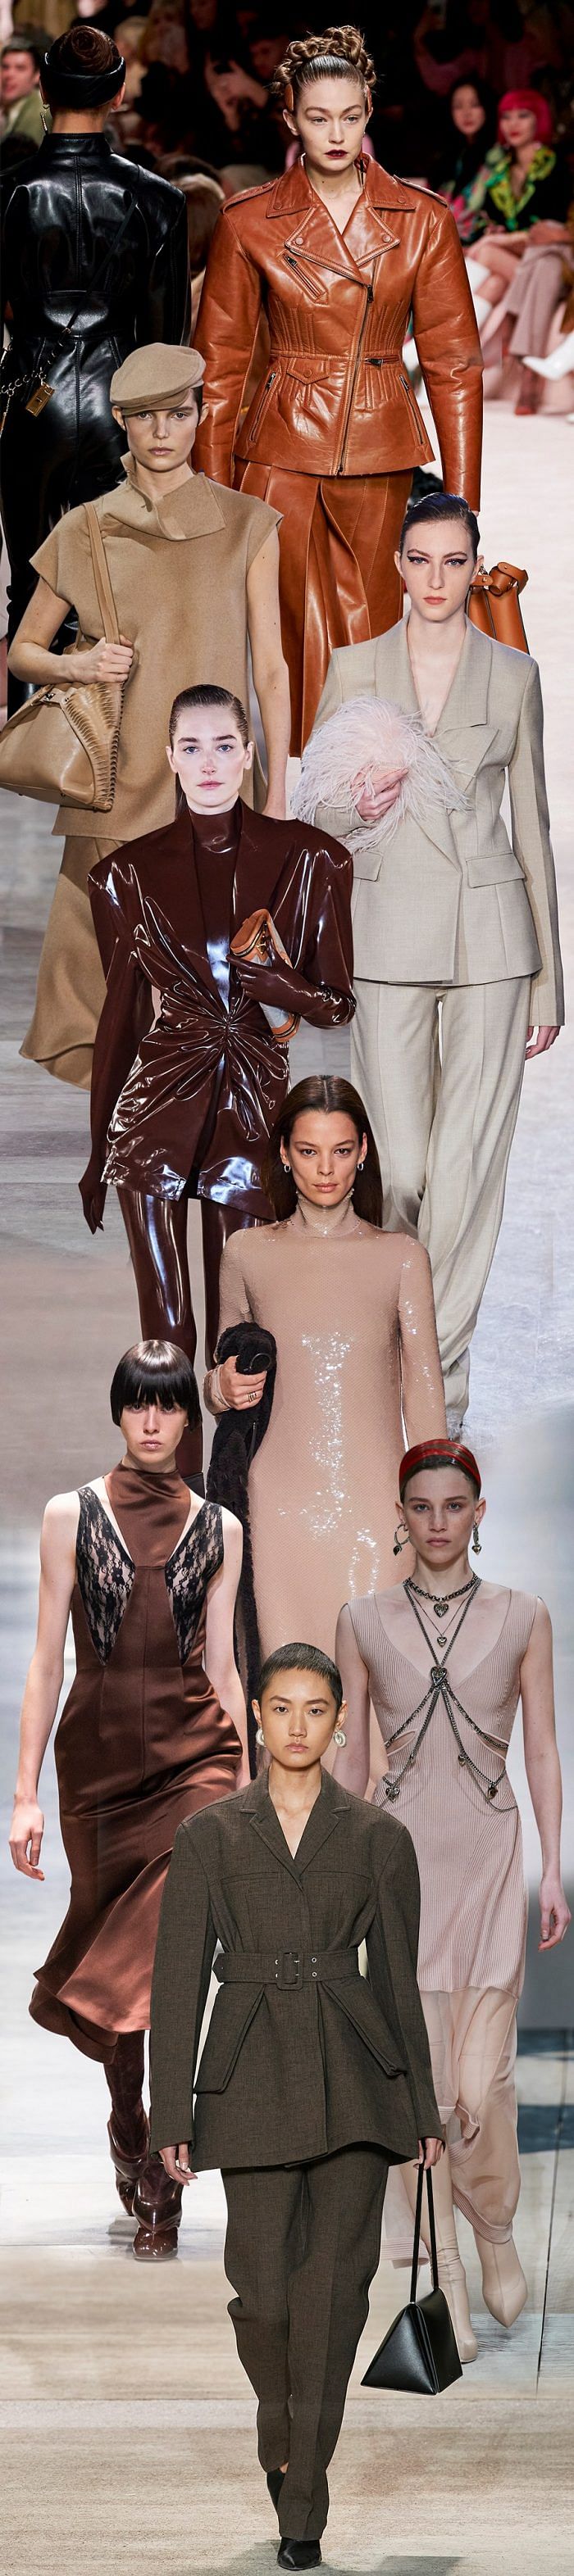 Standout Fashion Trends from the Fall 2020 Runways